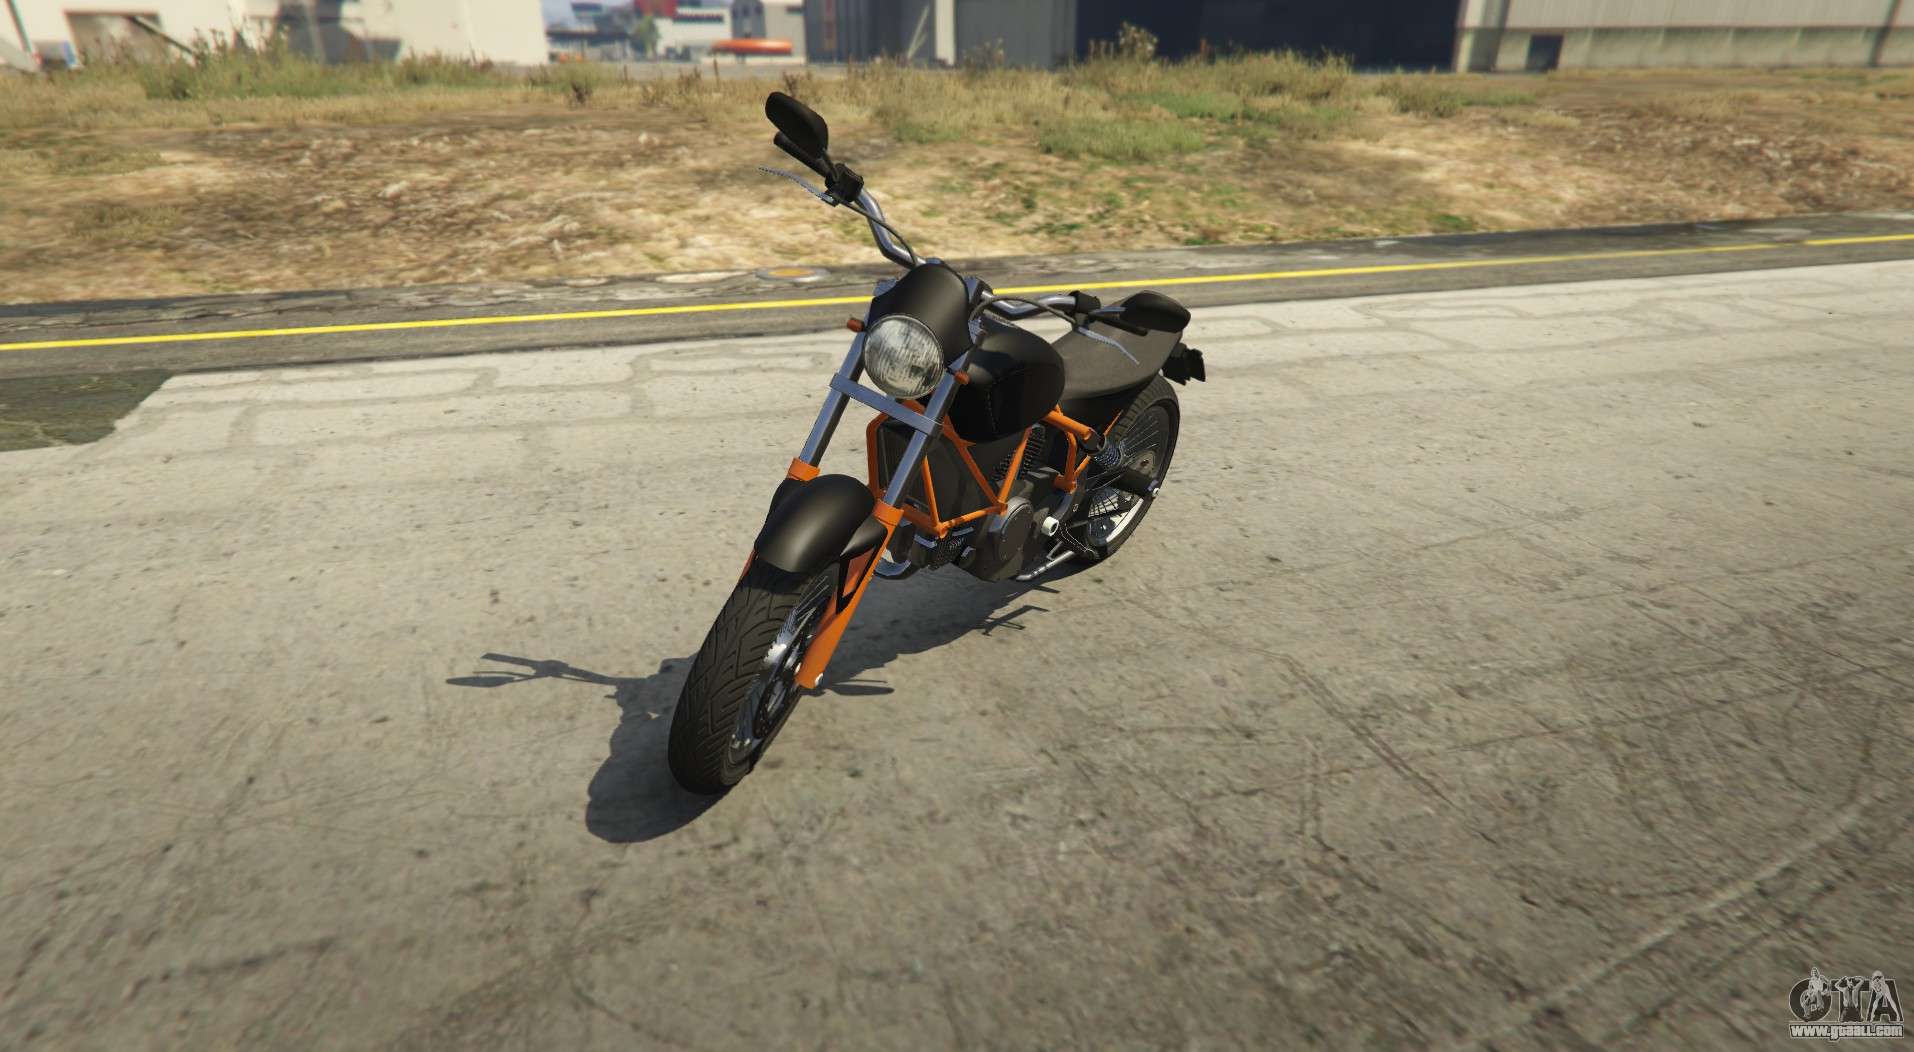 Pegassi Esskey - motorcycle for everyday life